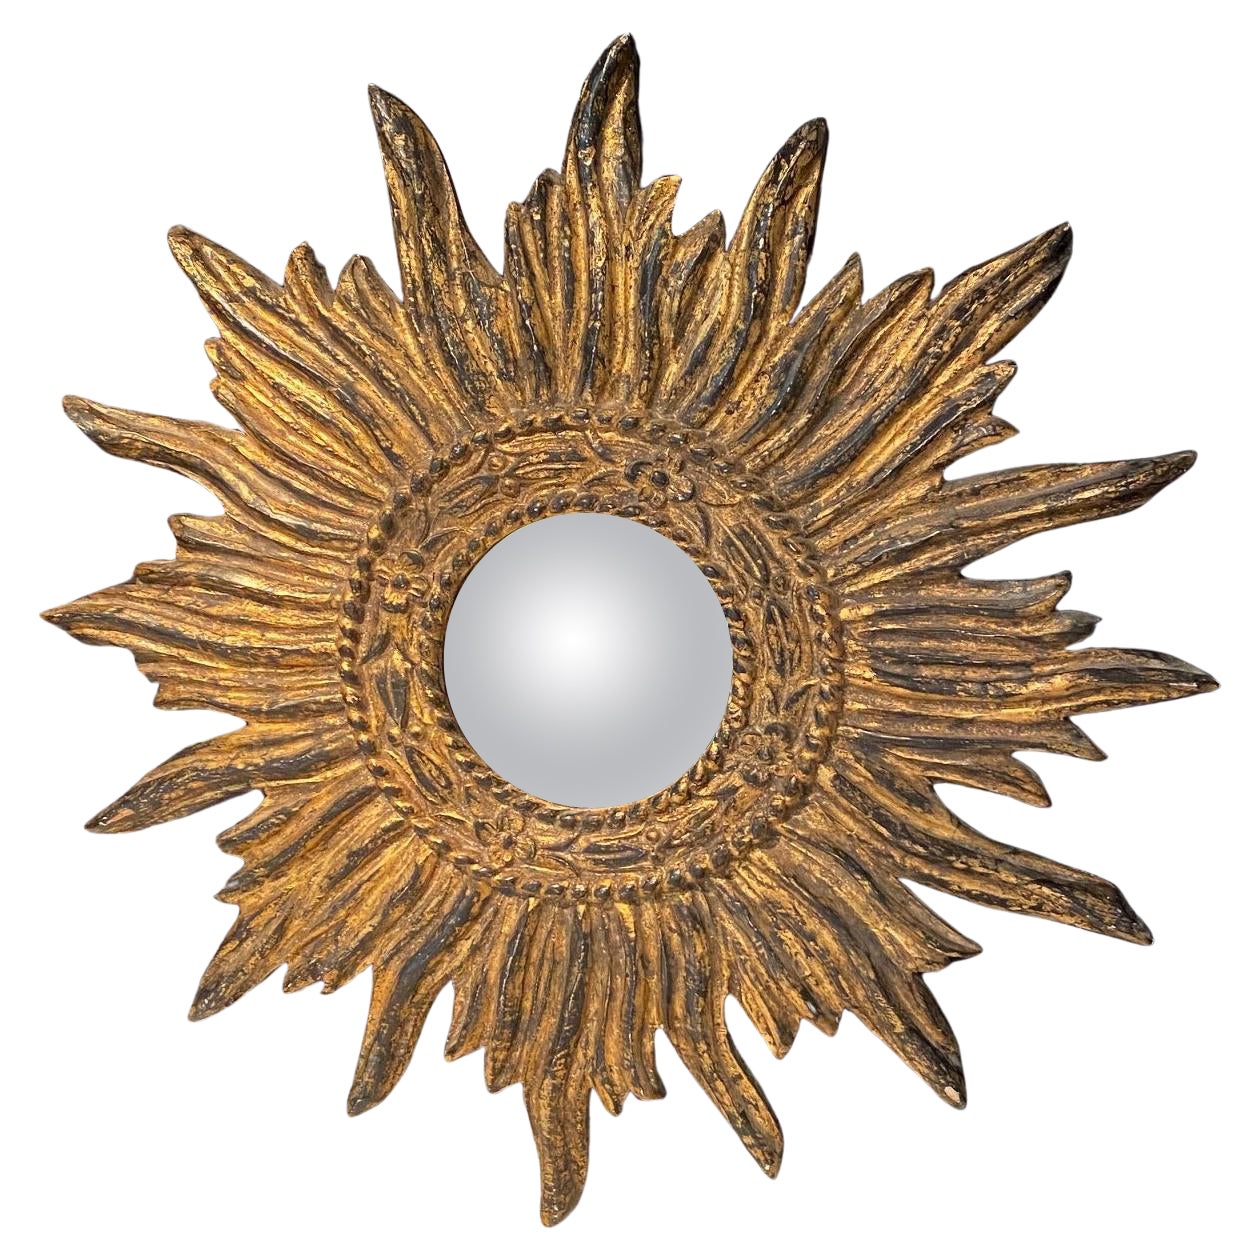  French Intricate Carved Gilt Wood Soleil Sunburst Starburst Wall Mirror  For Sale